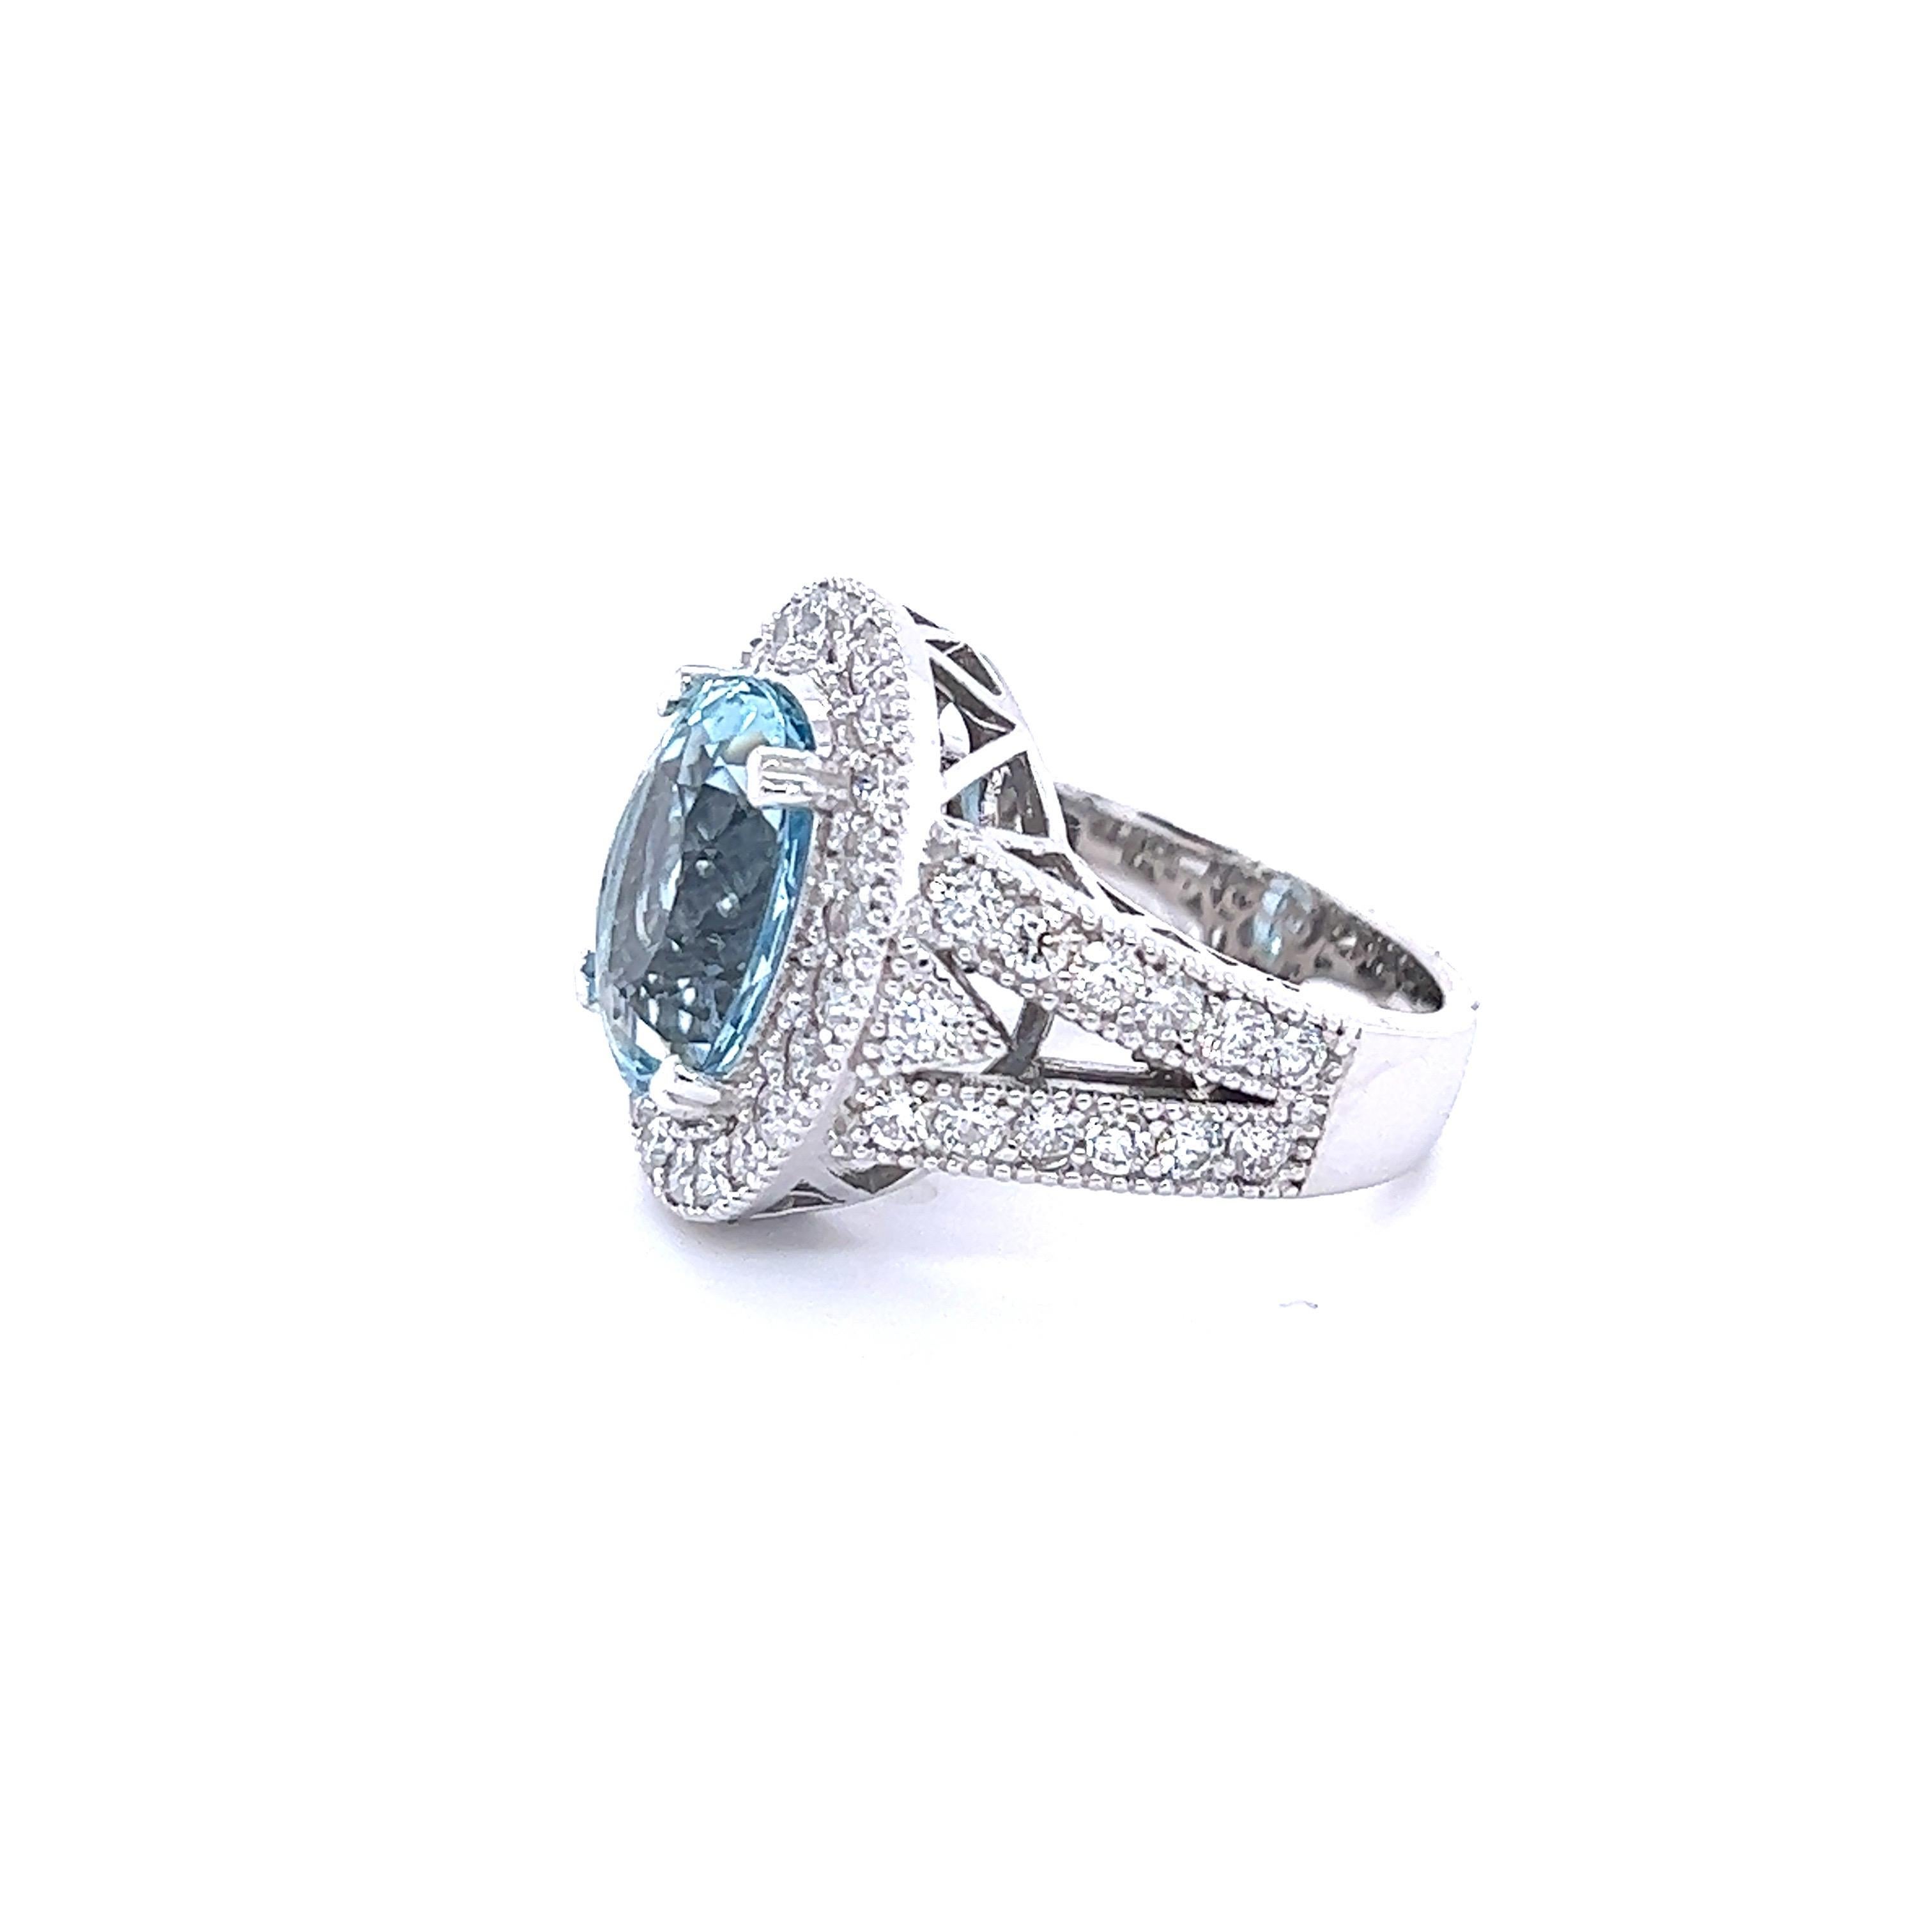 This ring has a beautiful Oval Cut Natural Aquamarine that measure at 13 mm x 10 mm and is 5.15 Carats. It is surrounded by 49 Round Cut Diamonds that weigh 1.77 carat (Clarity: VS2, Color: F). The total carat weight of this ring is 6.92 carats.